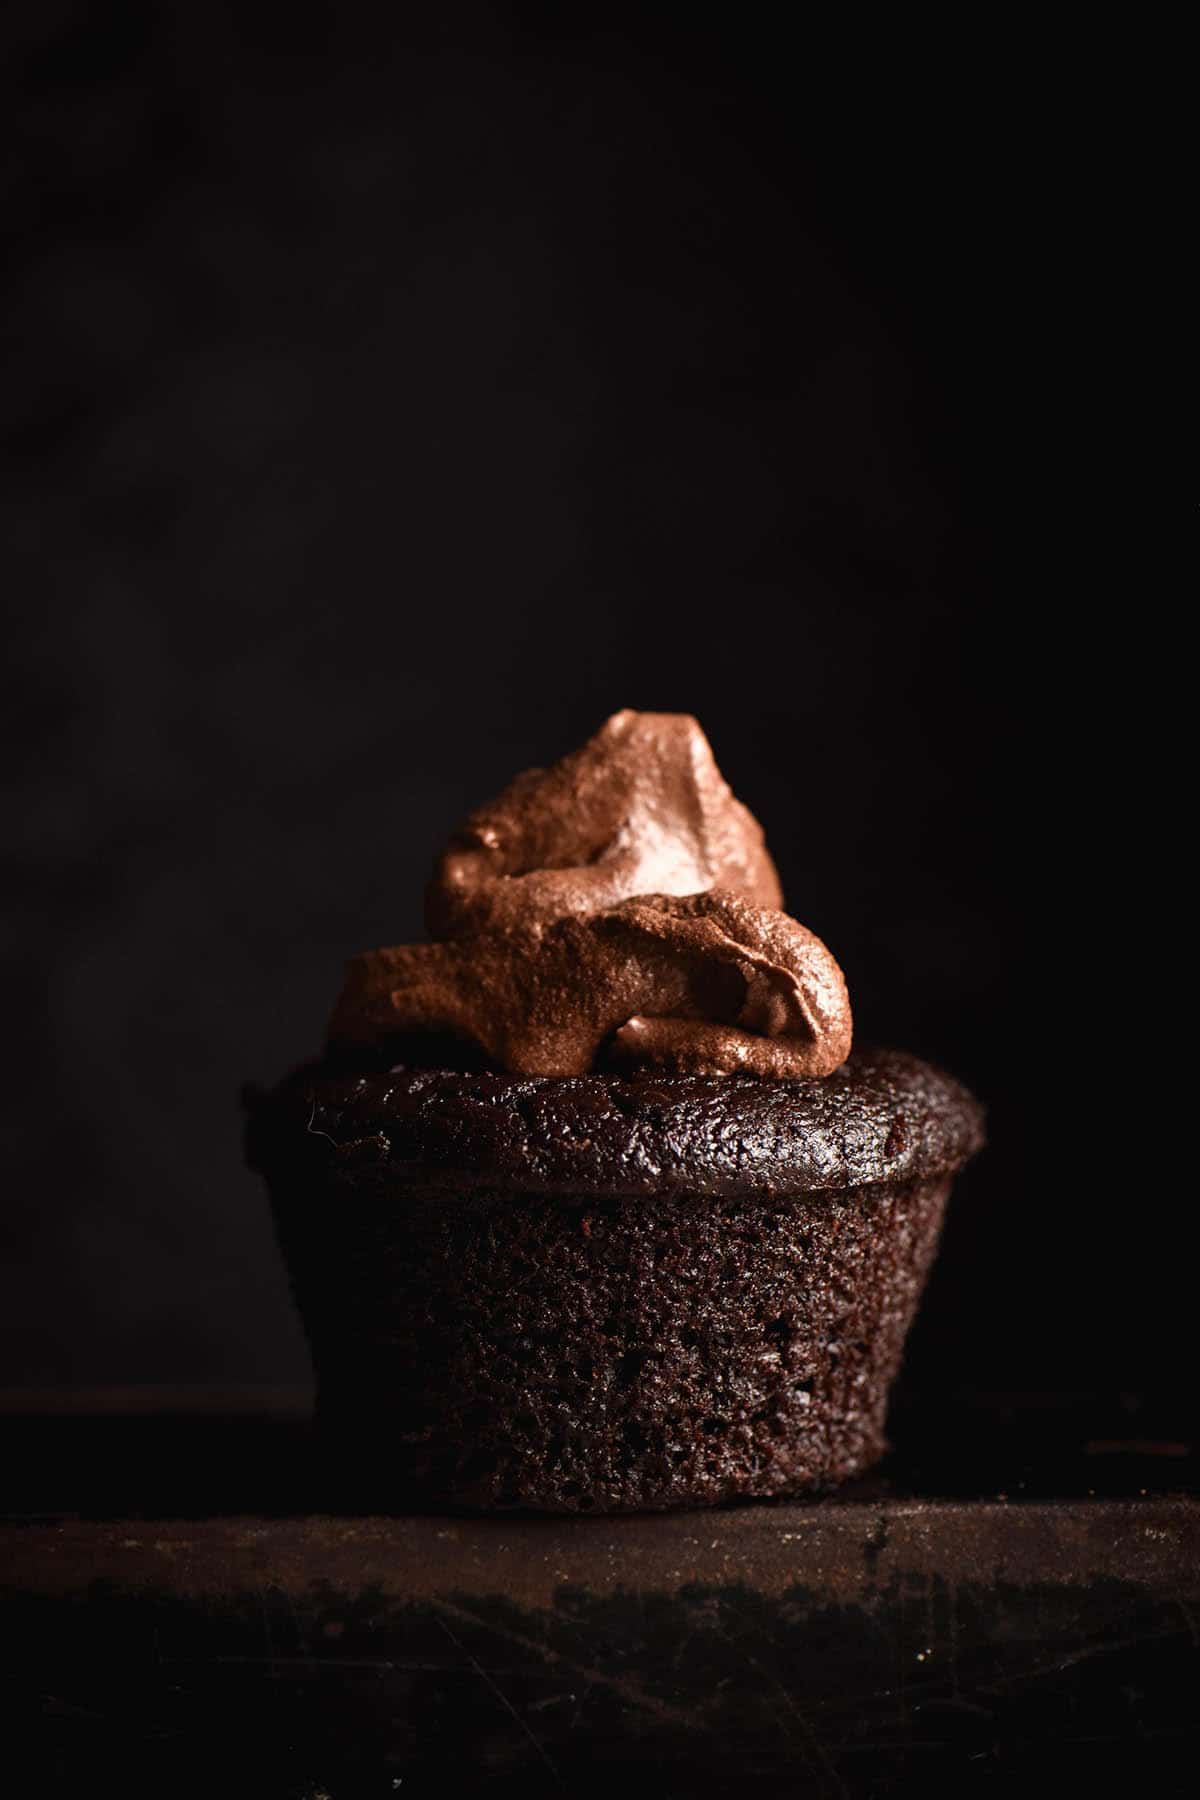 A side on dark and moody image of a gluten free chocolate muffin against a black backdrop. The muffin is topped with a casual dollop of chocolate buttercream.